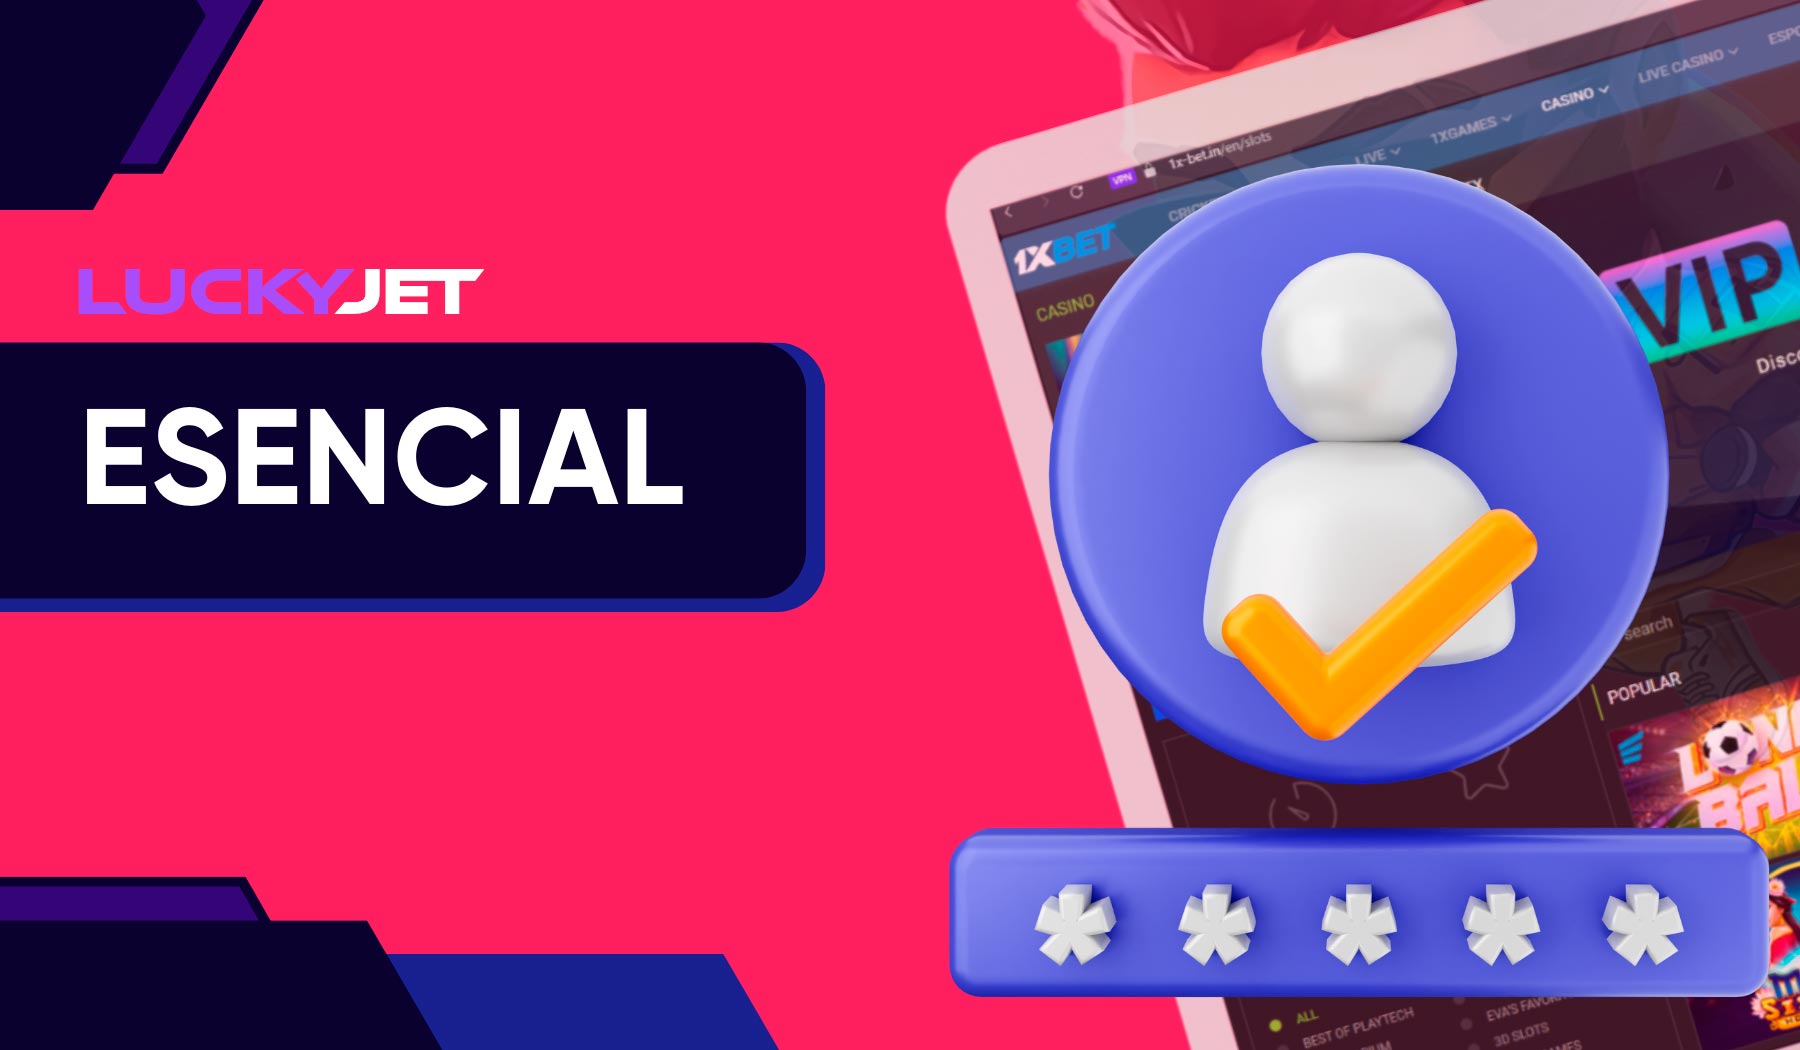 What is the 1xbet Lucky Jet verification process for?